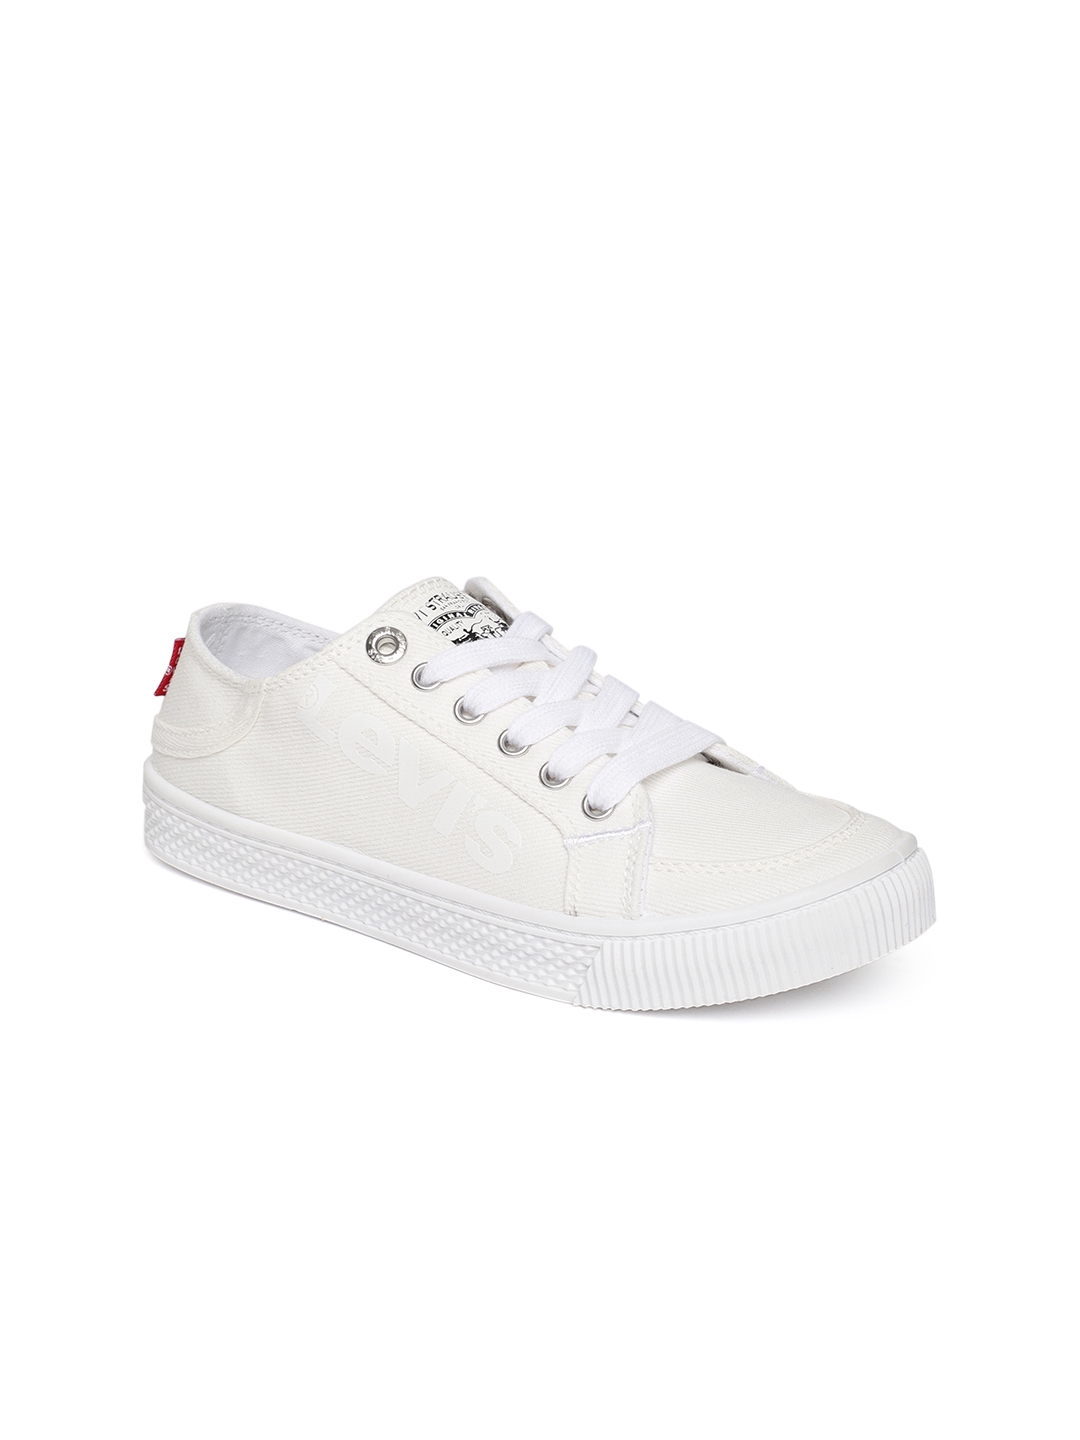 Buy Levi's Women's Lilac Sneakers for Women at Best Price @ Tata CLiQ-tuongthan.vn